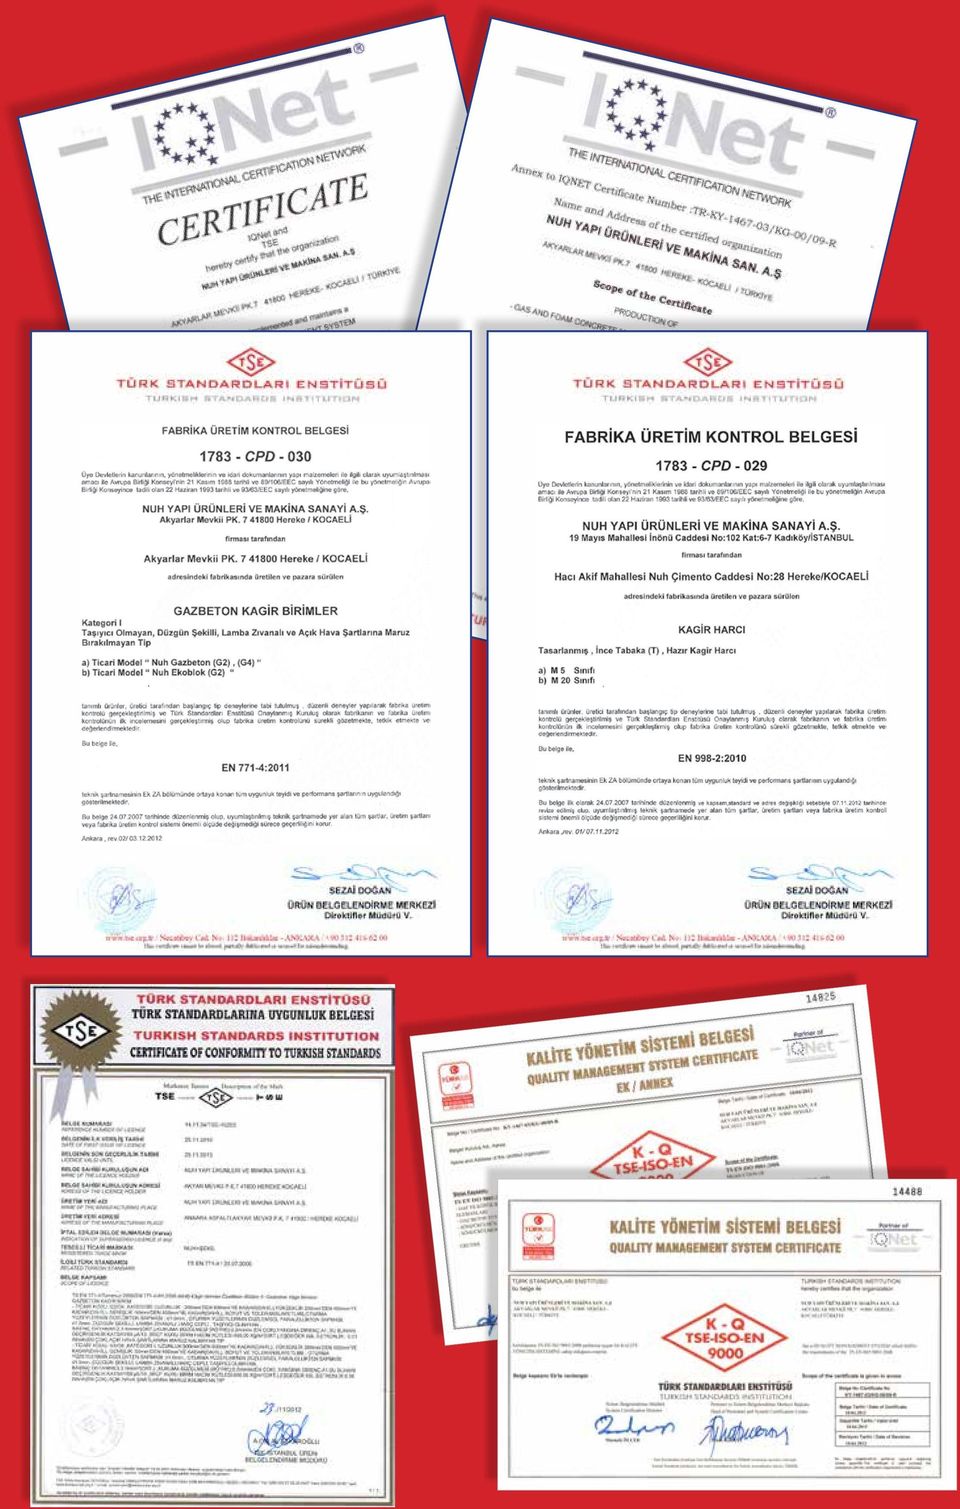 7 41800 HEREKE- KOCAELII TORKIYE has implemented and maintains a QUALITY MANAGEMENT SYSTEM which fulfills the requirements of the following standard TS EN ISO 9001 :2008 ---------------- THE